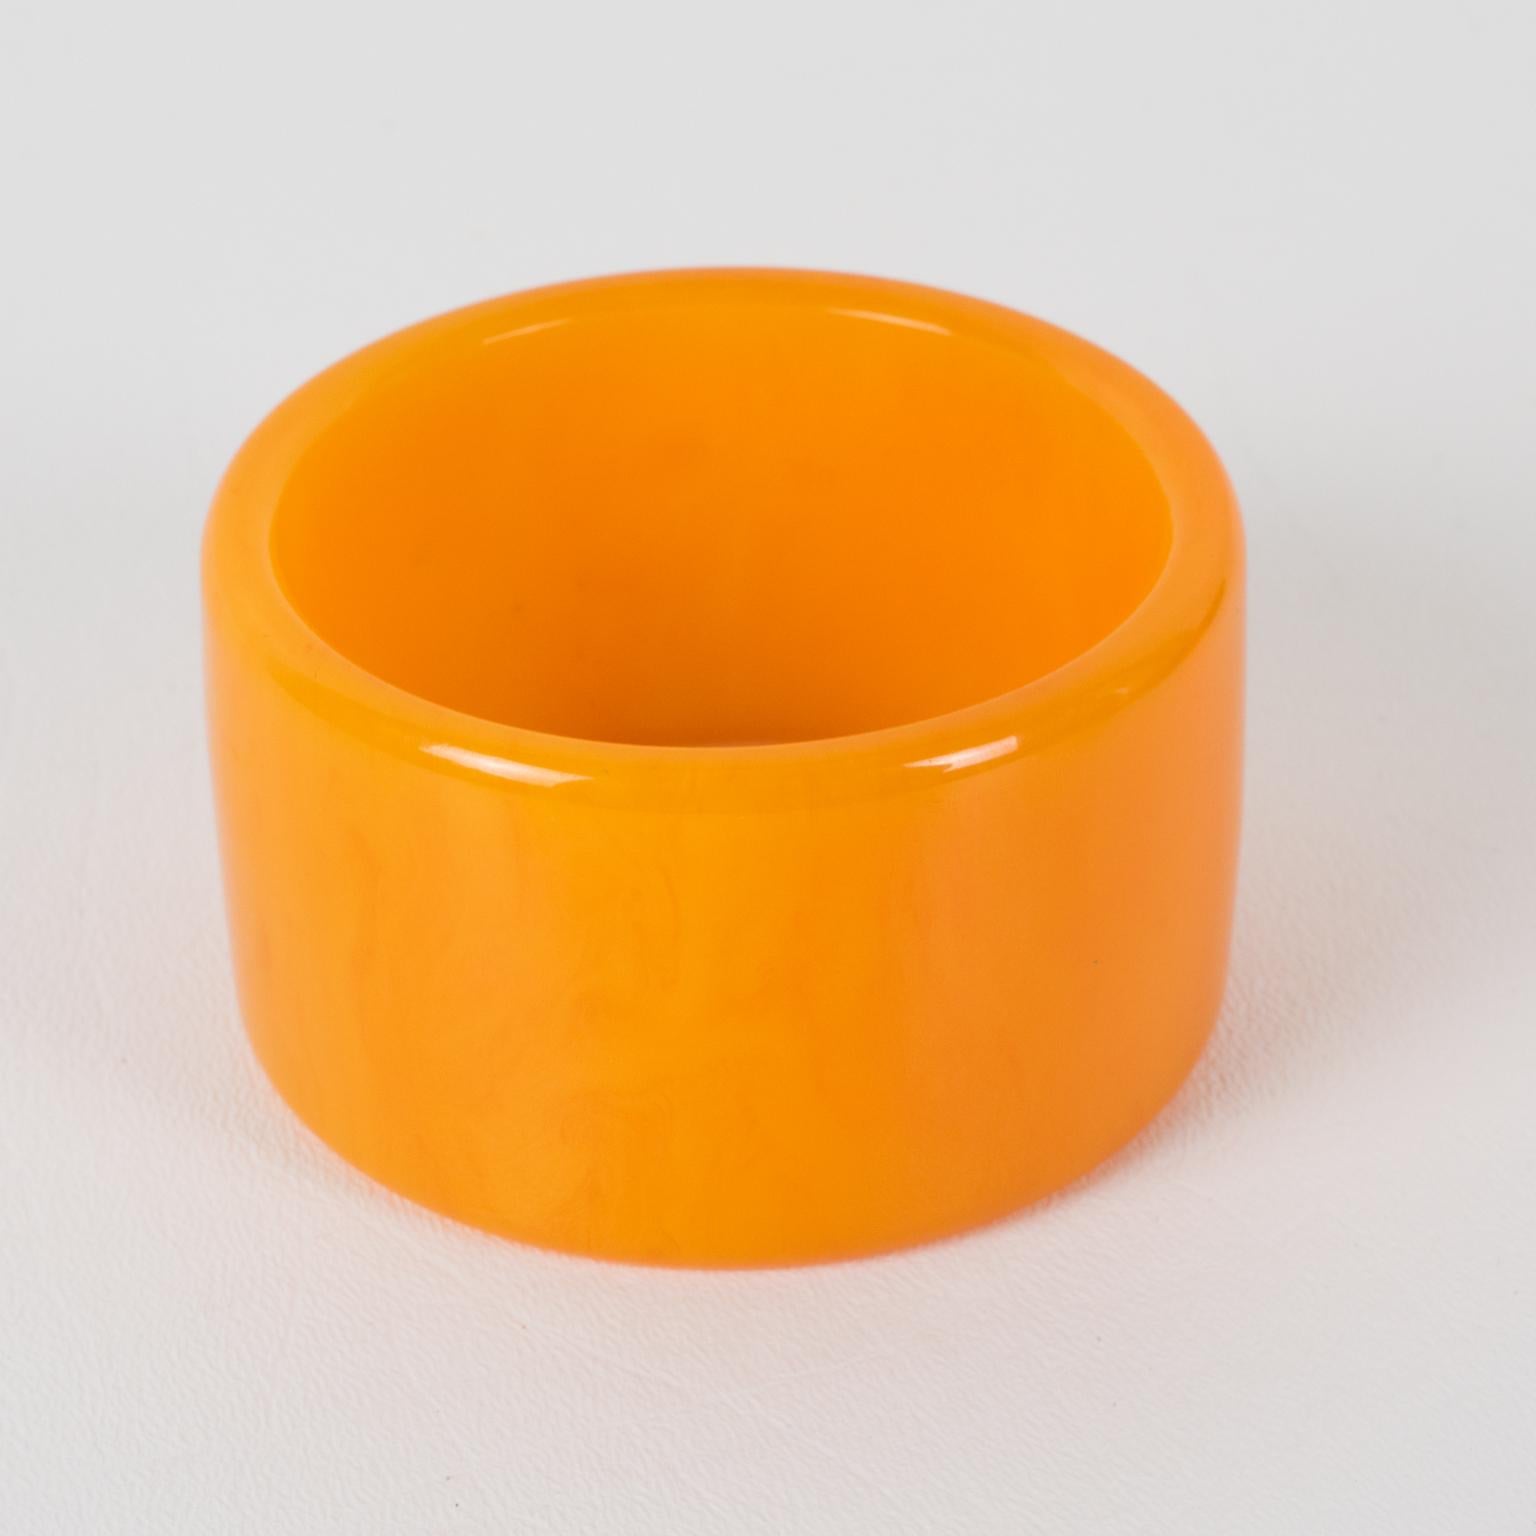 This lovely milky orange tangerine marble Bakelite bracelet bangle boasts a massive wide sliced shape with an intense soft orange color with cloudy milky swirling and translucency. 
Measurements: Inside across is 2.57 in diameter (6.5 cm) - outside